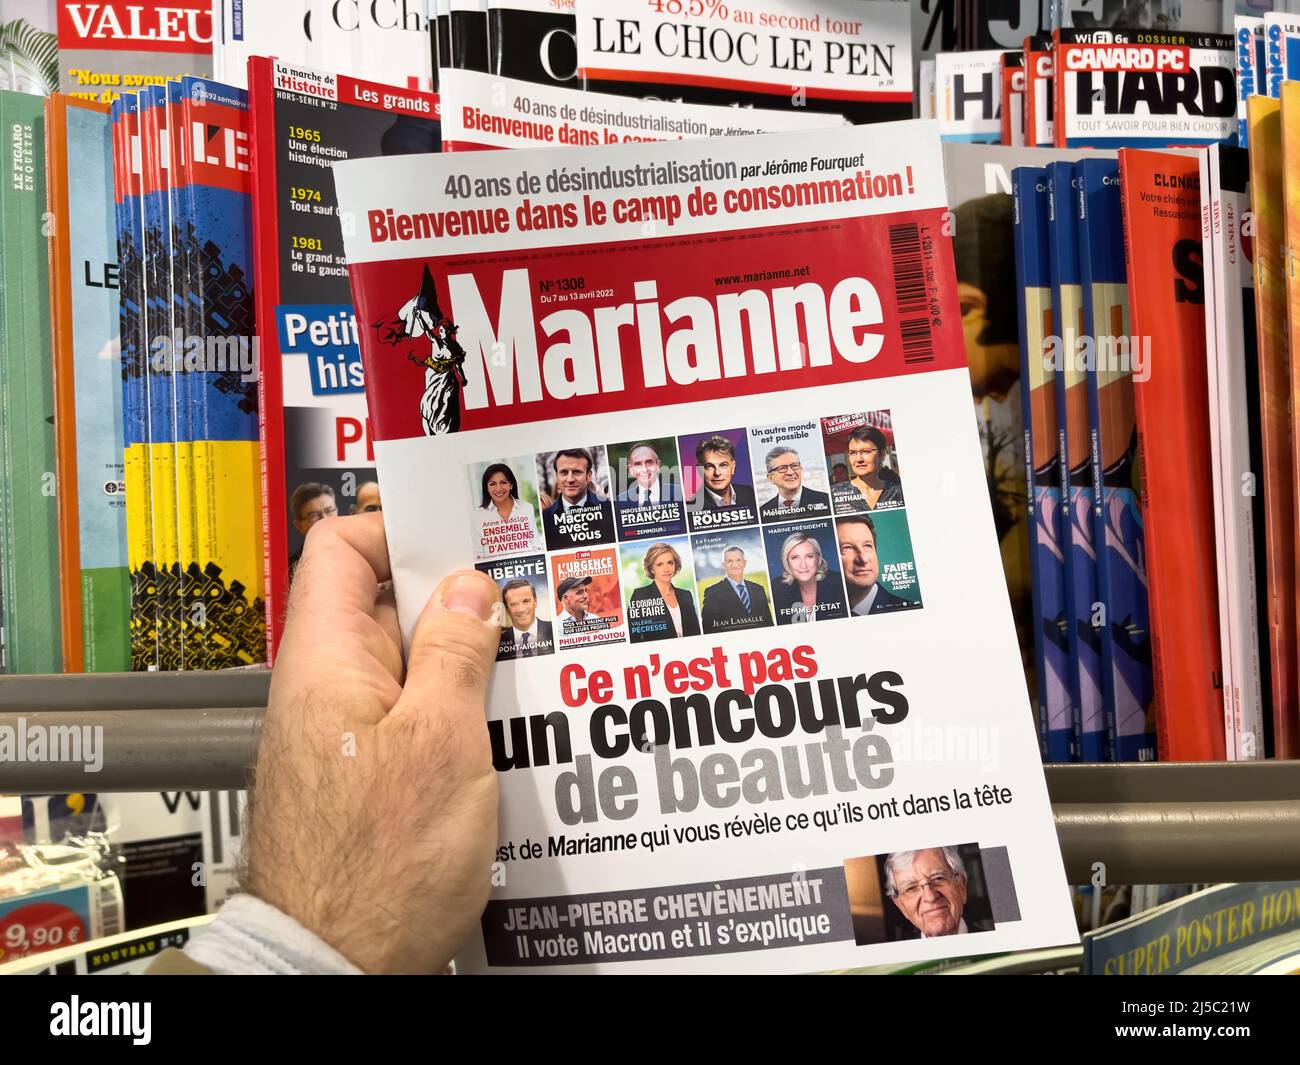 Paris, France - Apr 11, 2022: Stand with Marianne newspaper magazine covering the French presidential election of 2022, Macron, Melenchon, Le pen, Zemmour, Hidalgo, Pecresse, Jadot, Putou, Roussel Stock Photo